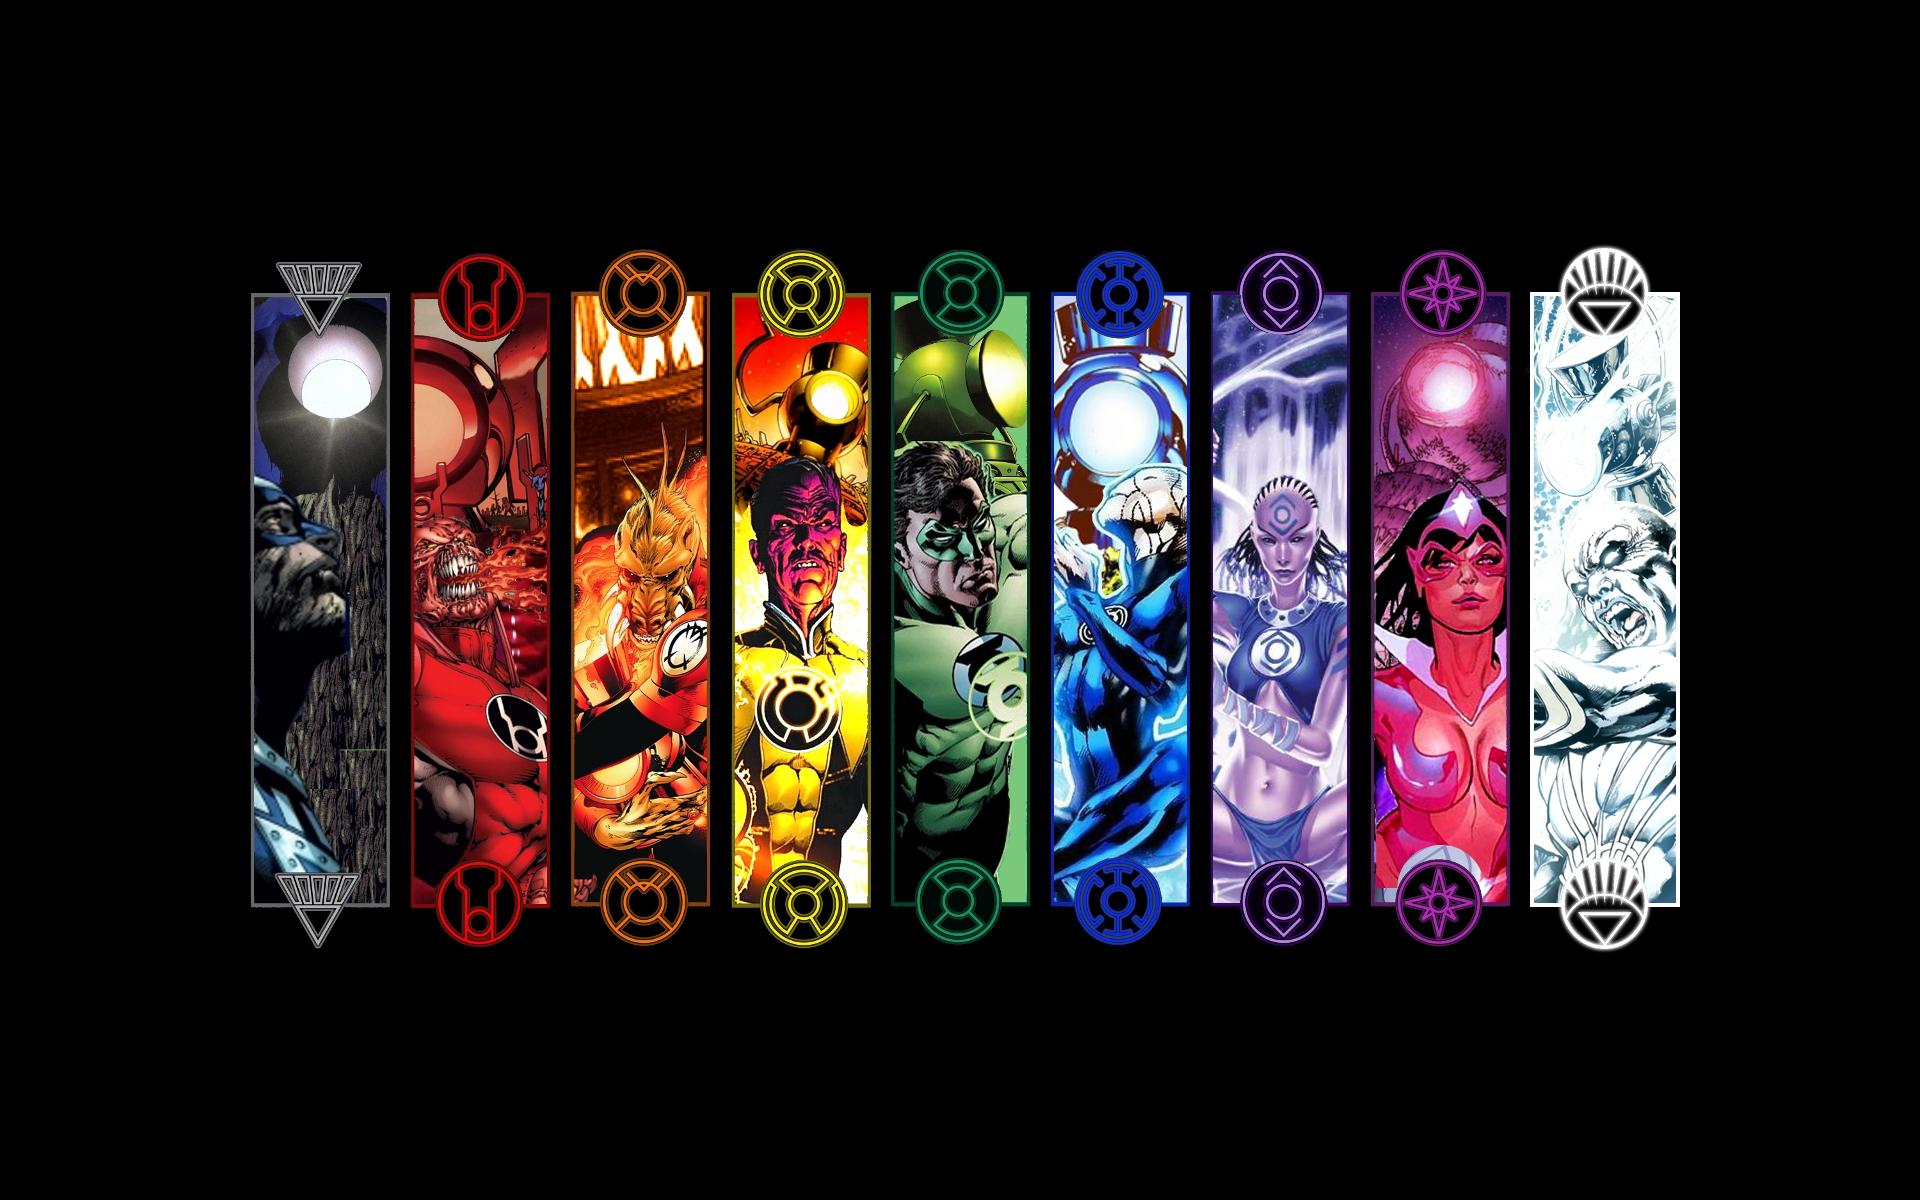 lantern corps wallpaper,glass,stained glass,graphic design,font,recreation